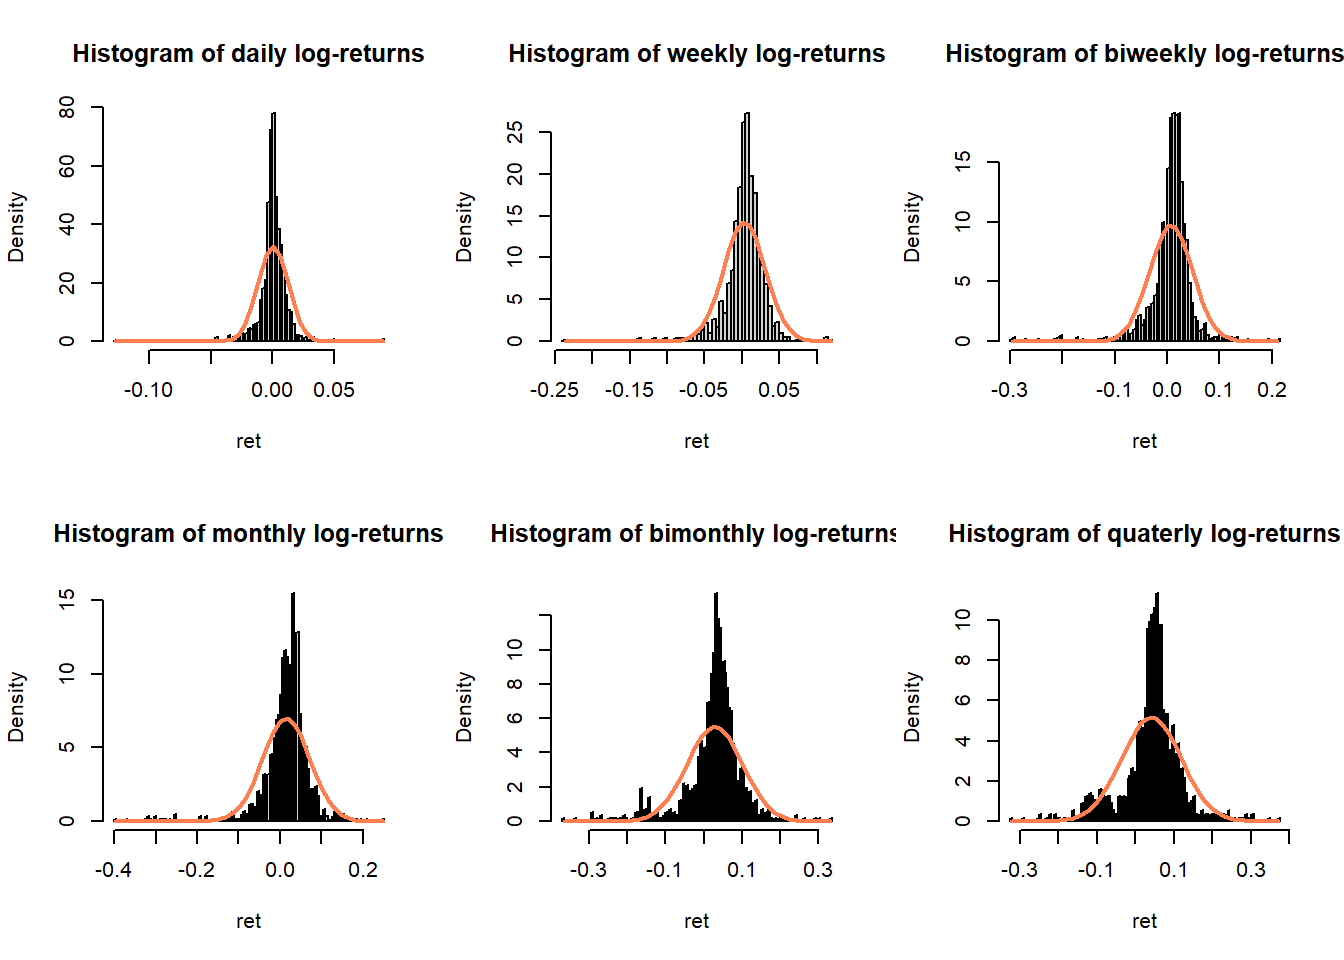 Histograms of S&P 500 log-returns compared with normal distribution